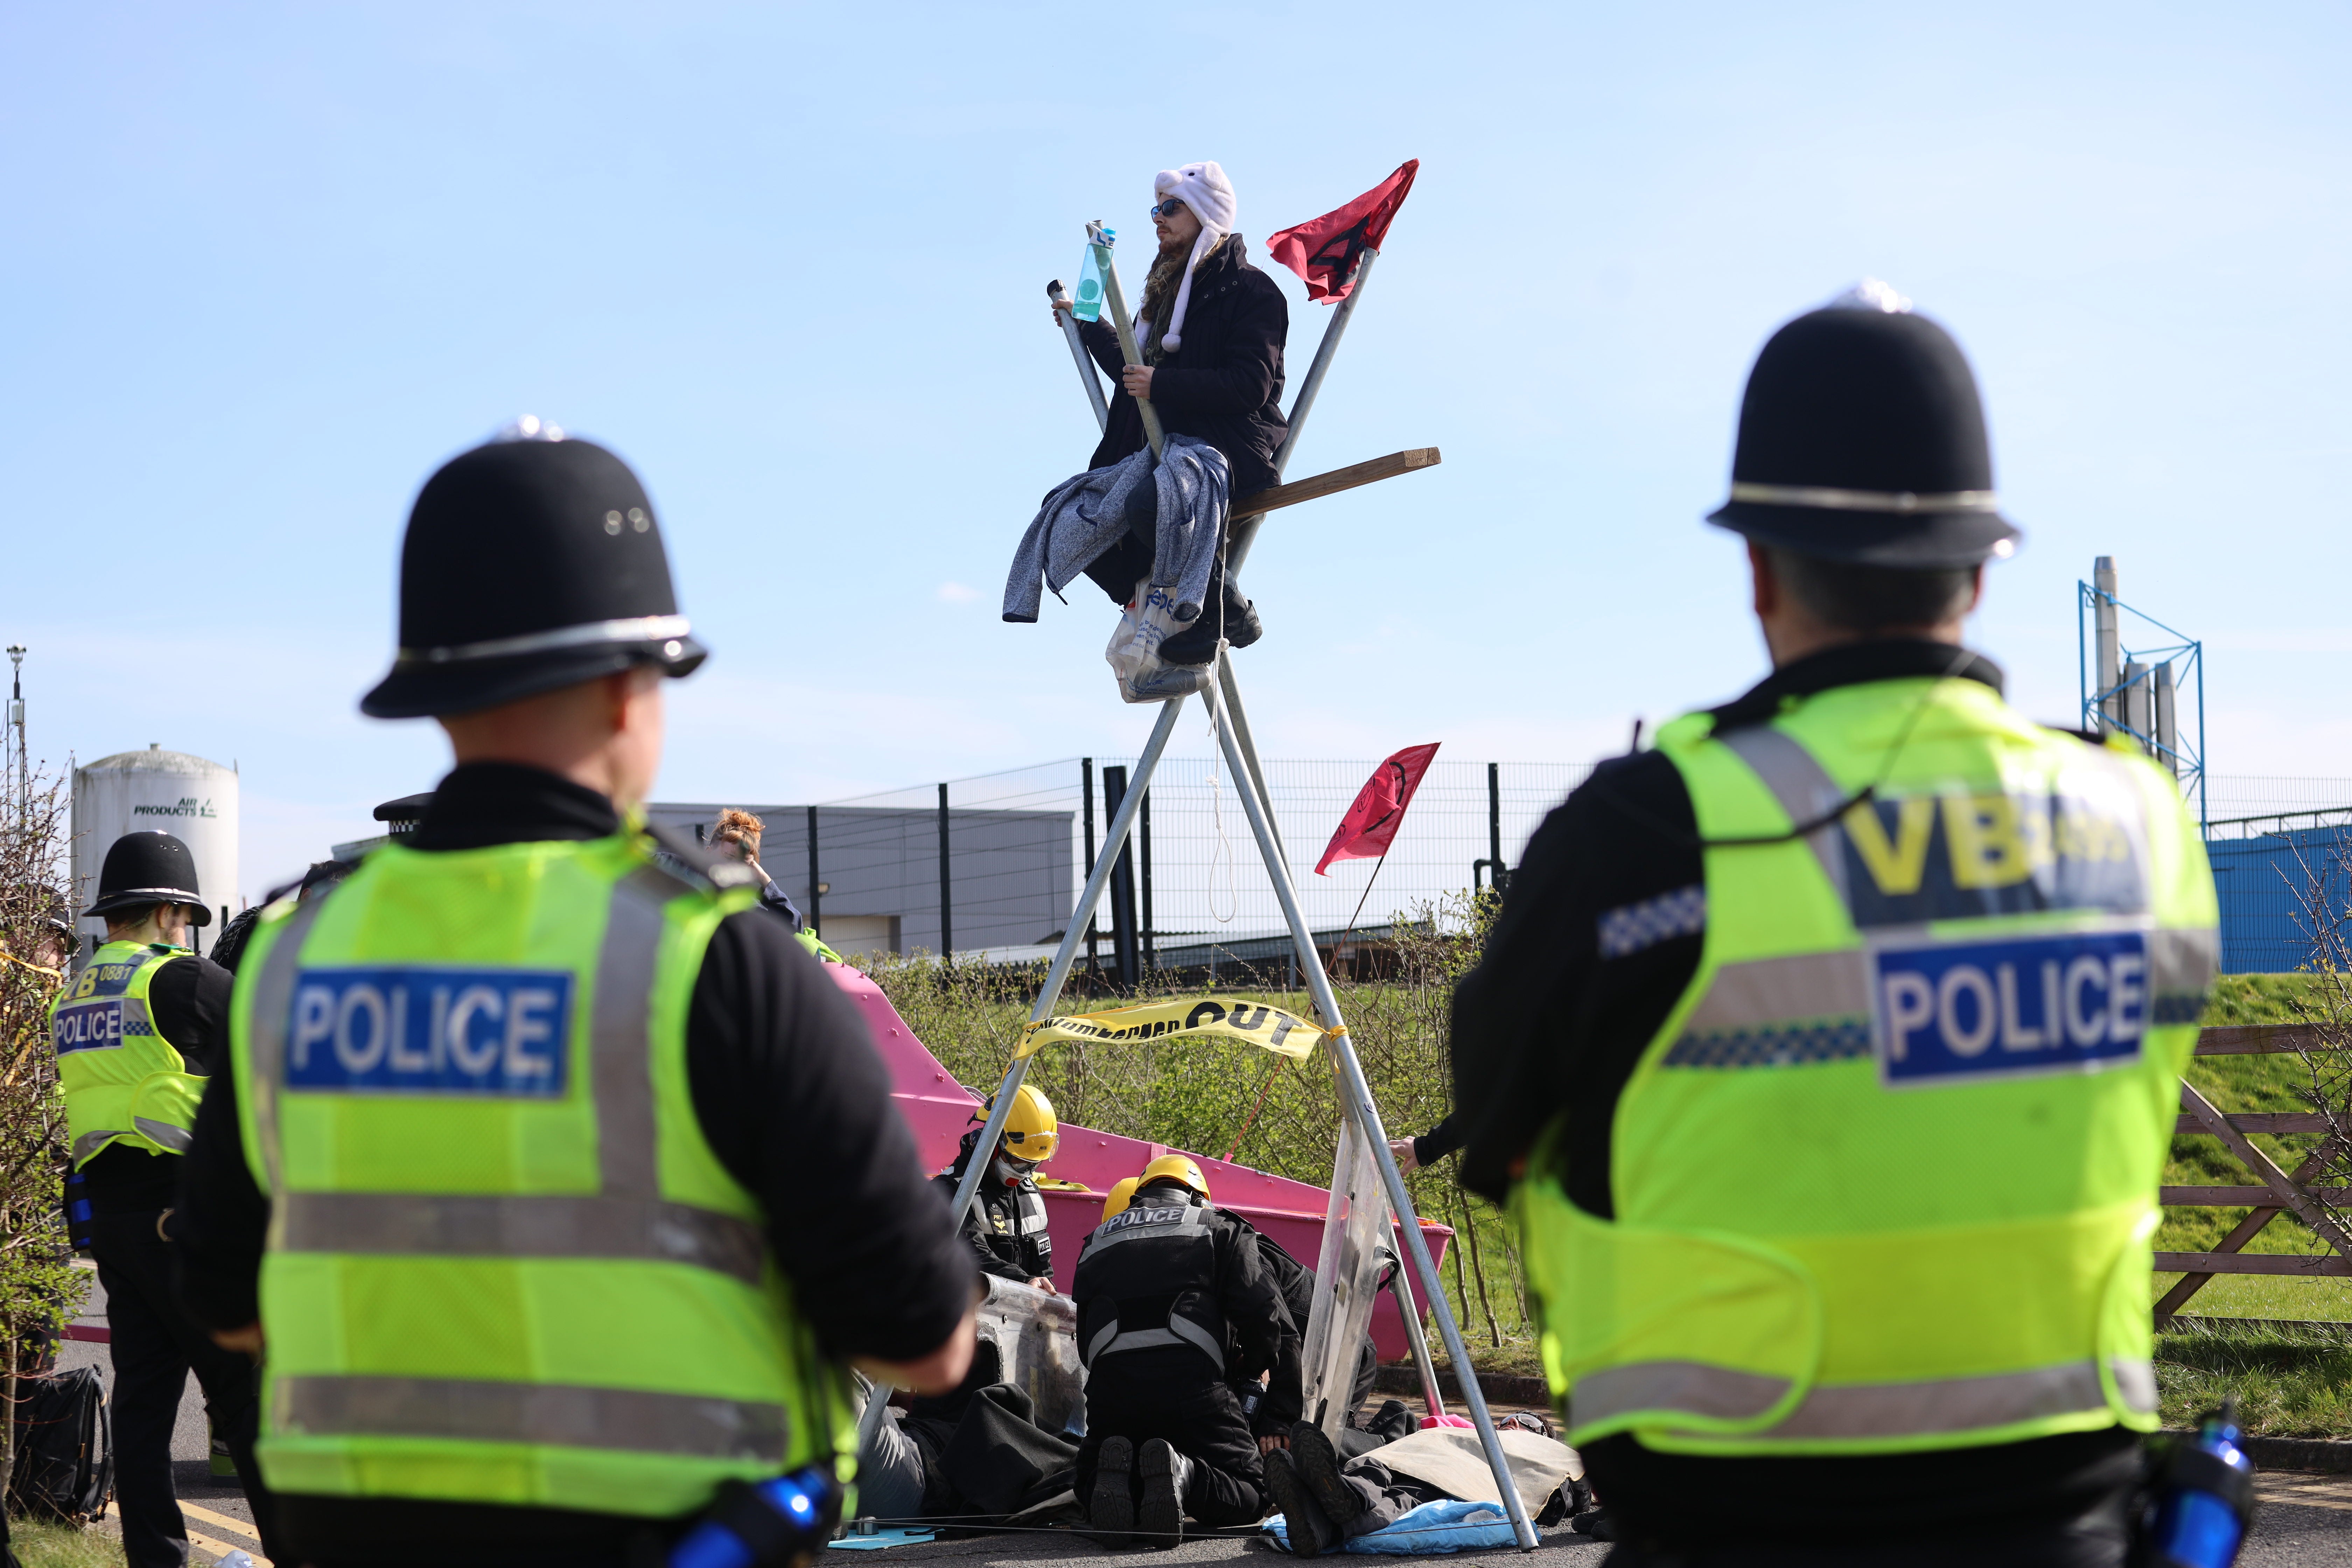 Police at an Extinction Rebellion protest at Schlumberger’s research campus in Cambridge